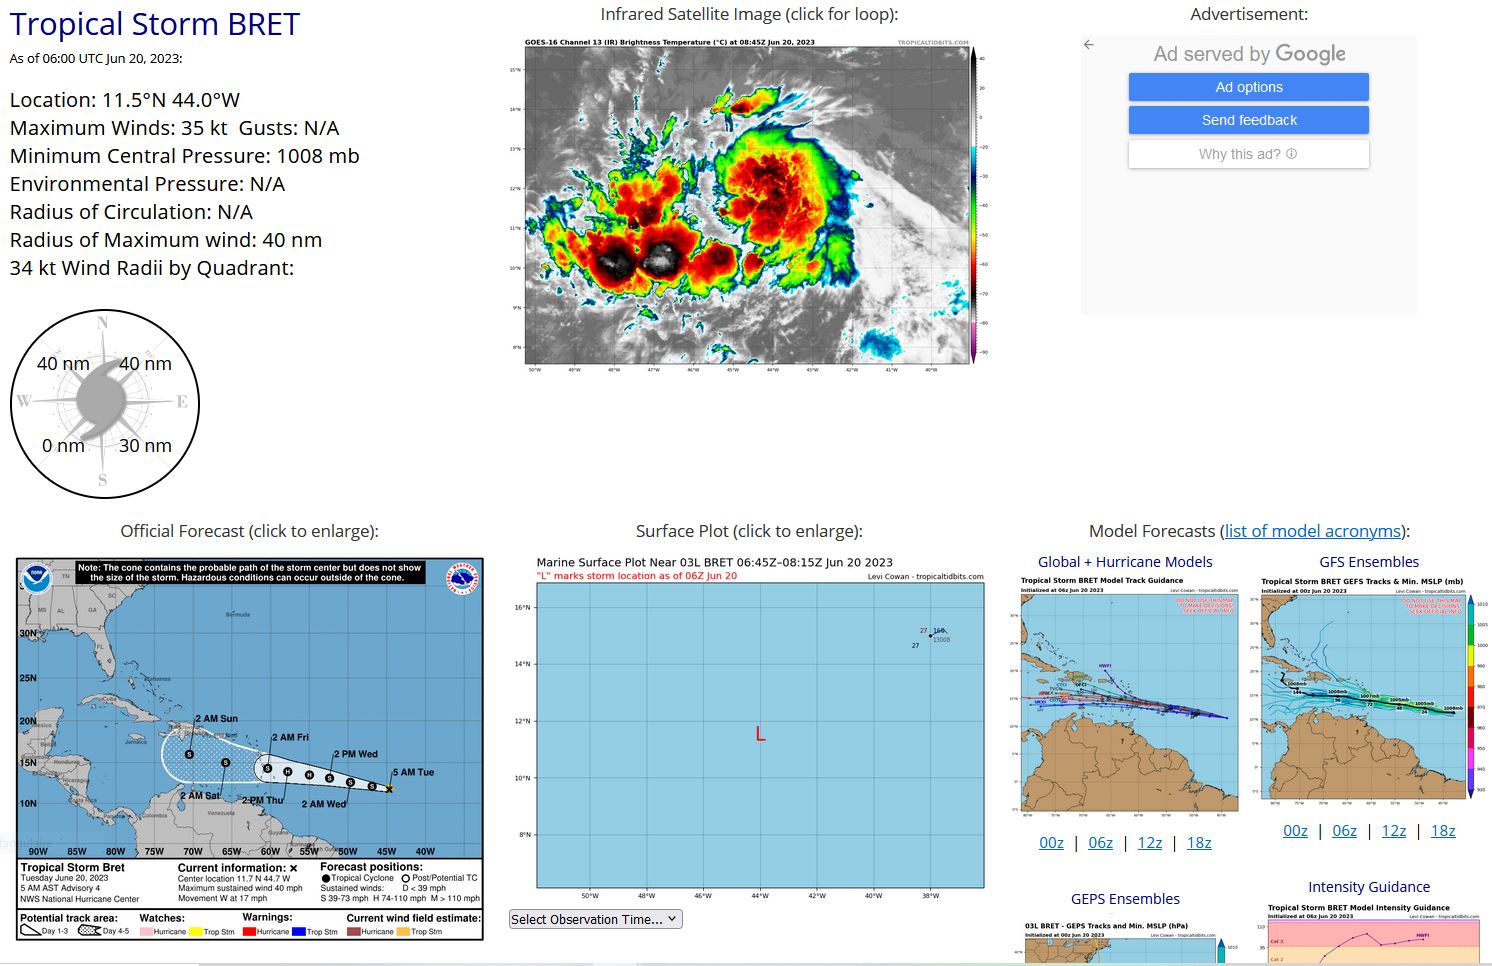 TS 03L(BRET) forecast to reach CAT 1 US by 48h approaching the Lesser Antilles//Invest 93L//02A(BIPARJOY) over-land remnants//2009UTC